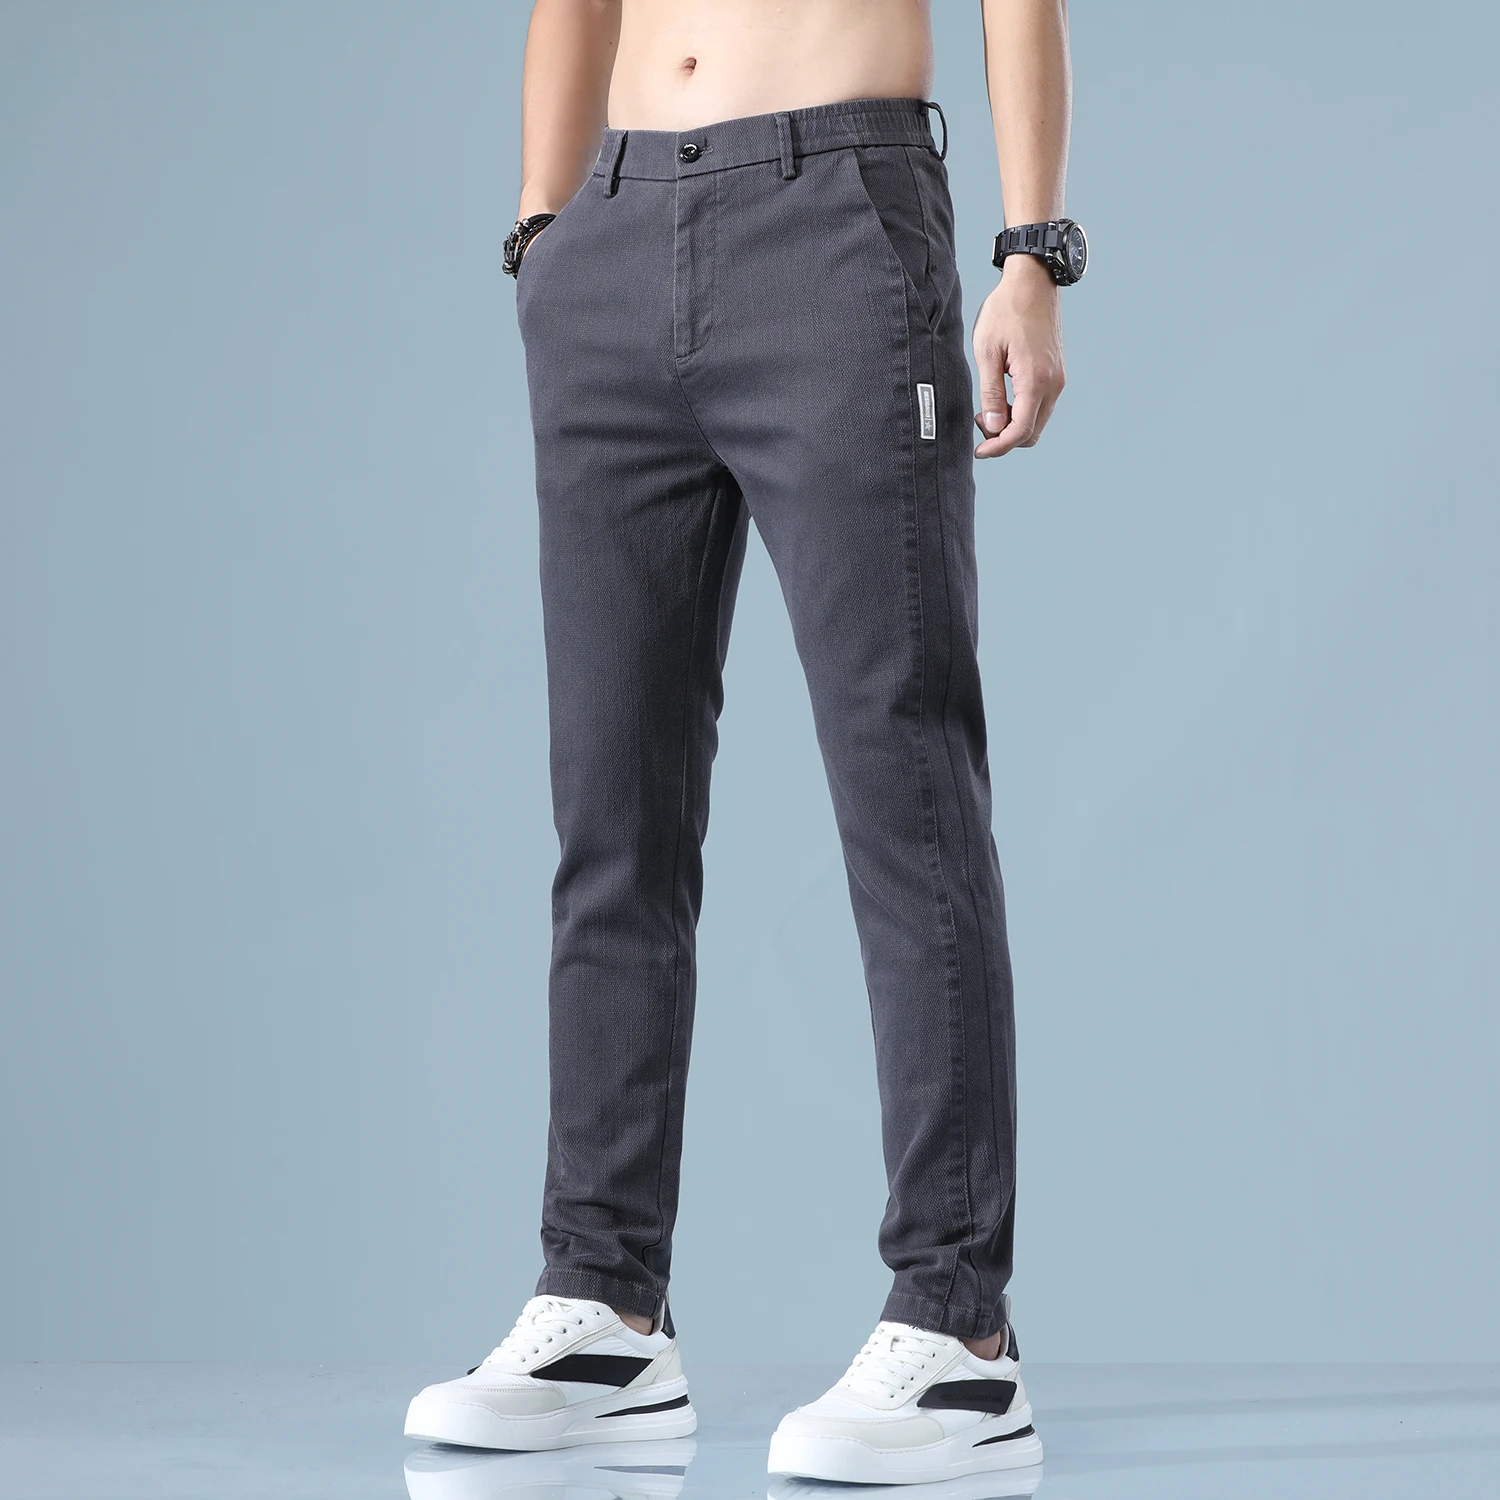 2022 Summer New Thin Casual Pants Men Classic Korea Style Fashion Business Slim Fit Straight Cotton Solid Color Brand Trousers